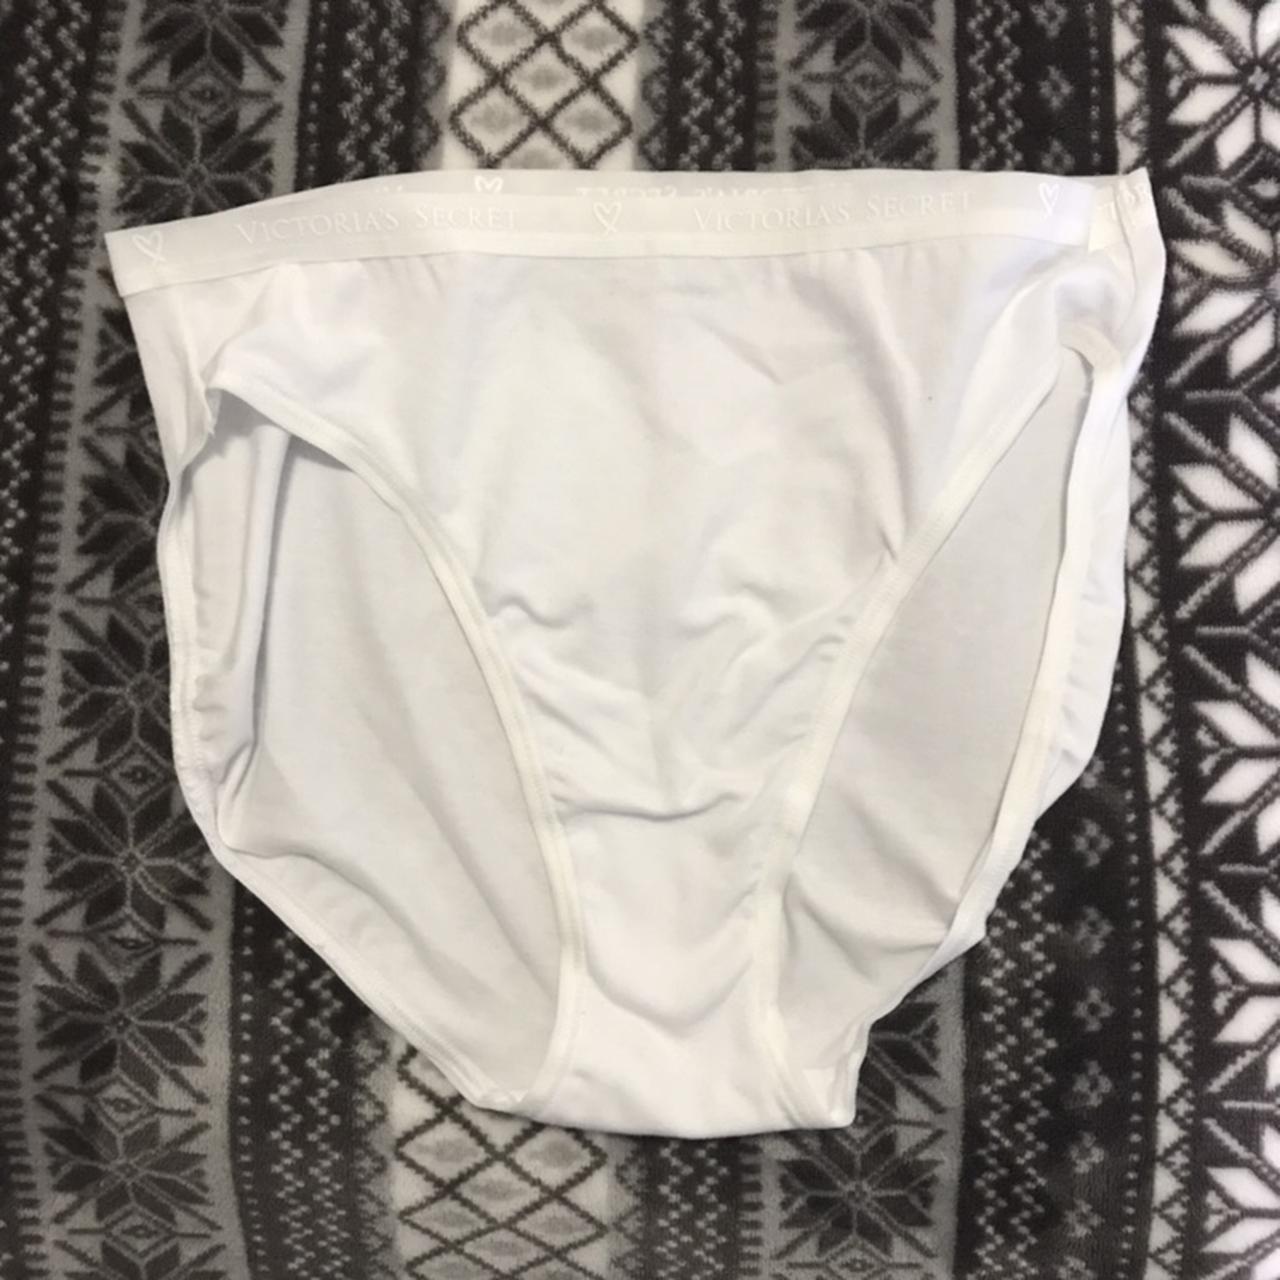 He asked and I said yes white all cotton Victoria secret panty